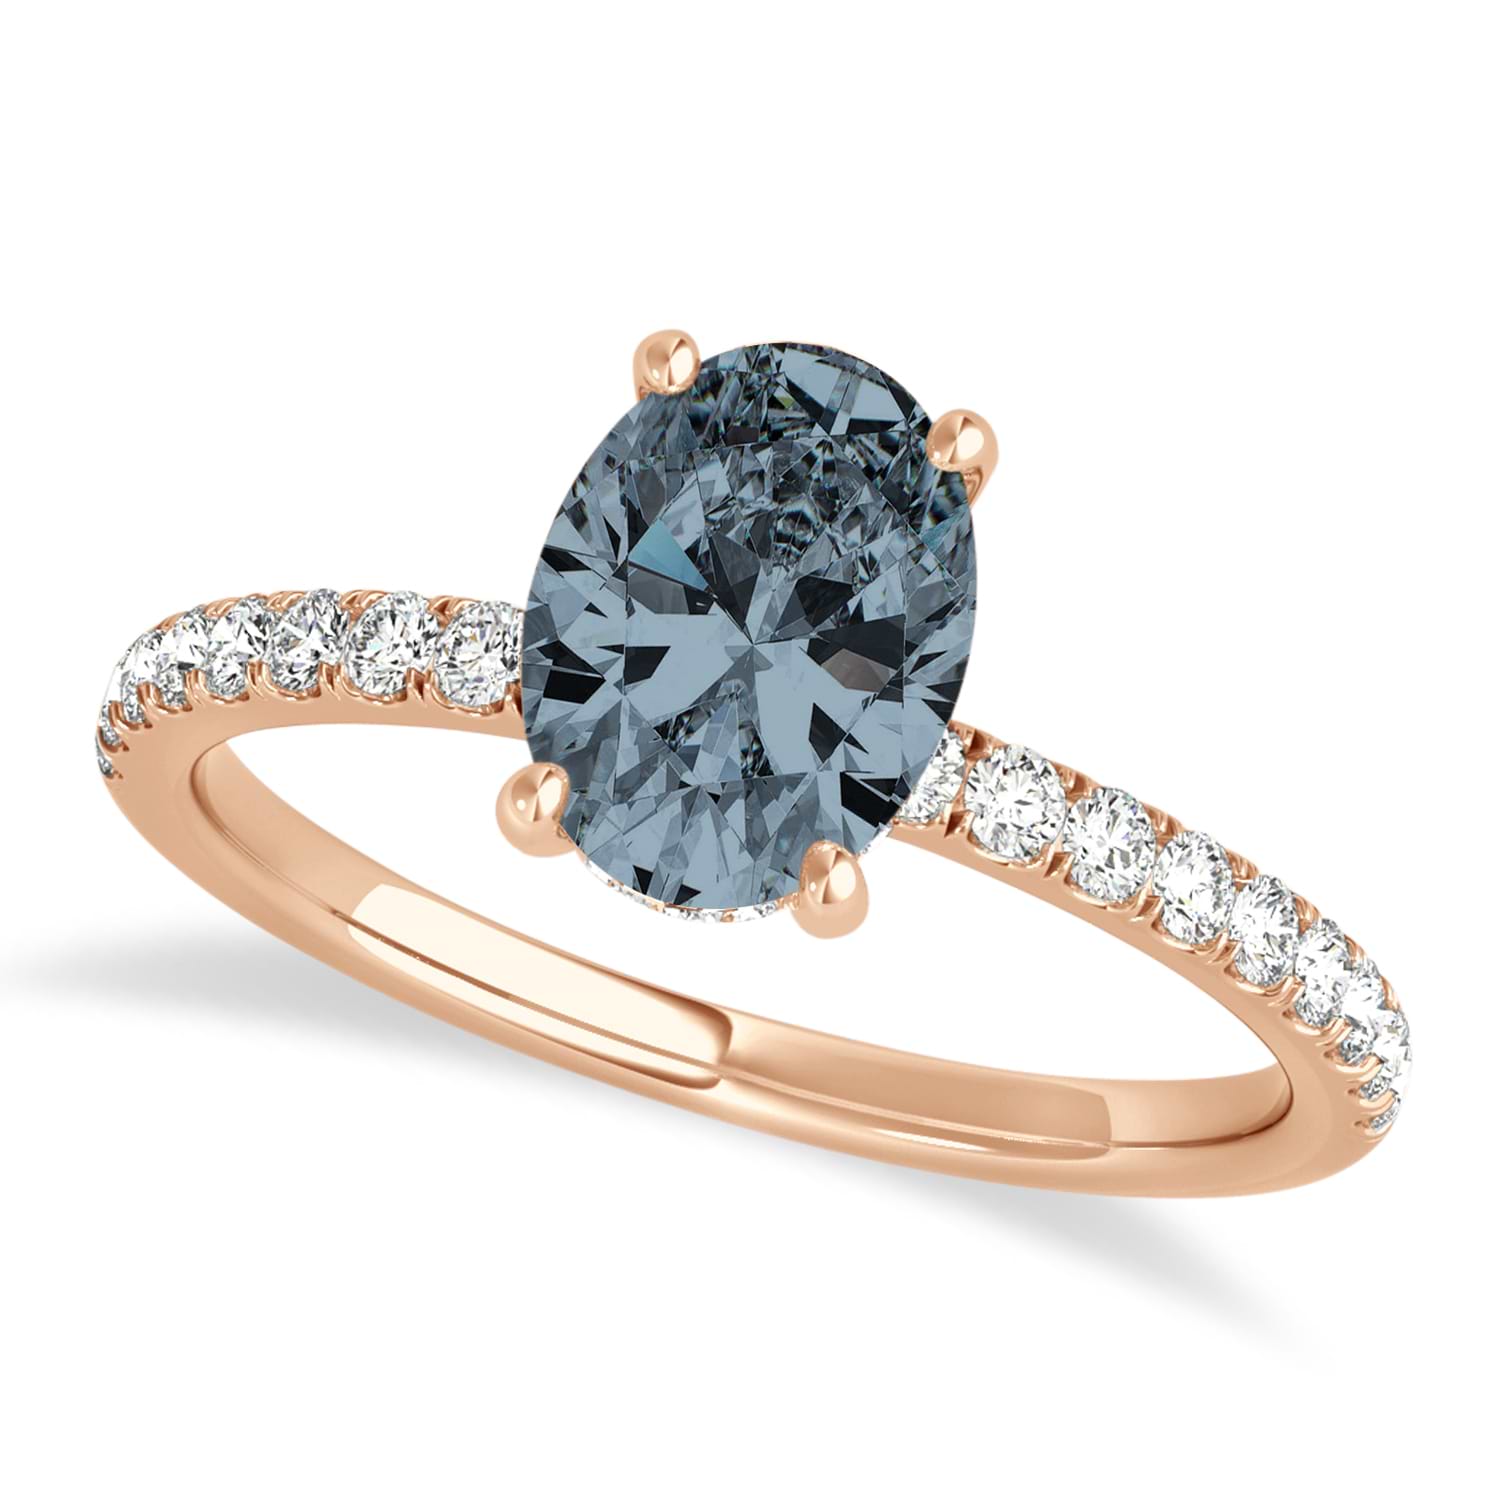 Oval Gray Spinel & Diamond Single Row Hidden Halo Engagement Ring 18k Rose Gold (0.68ct)